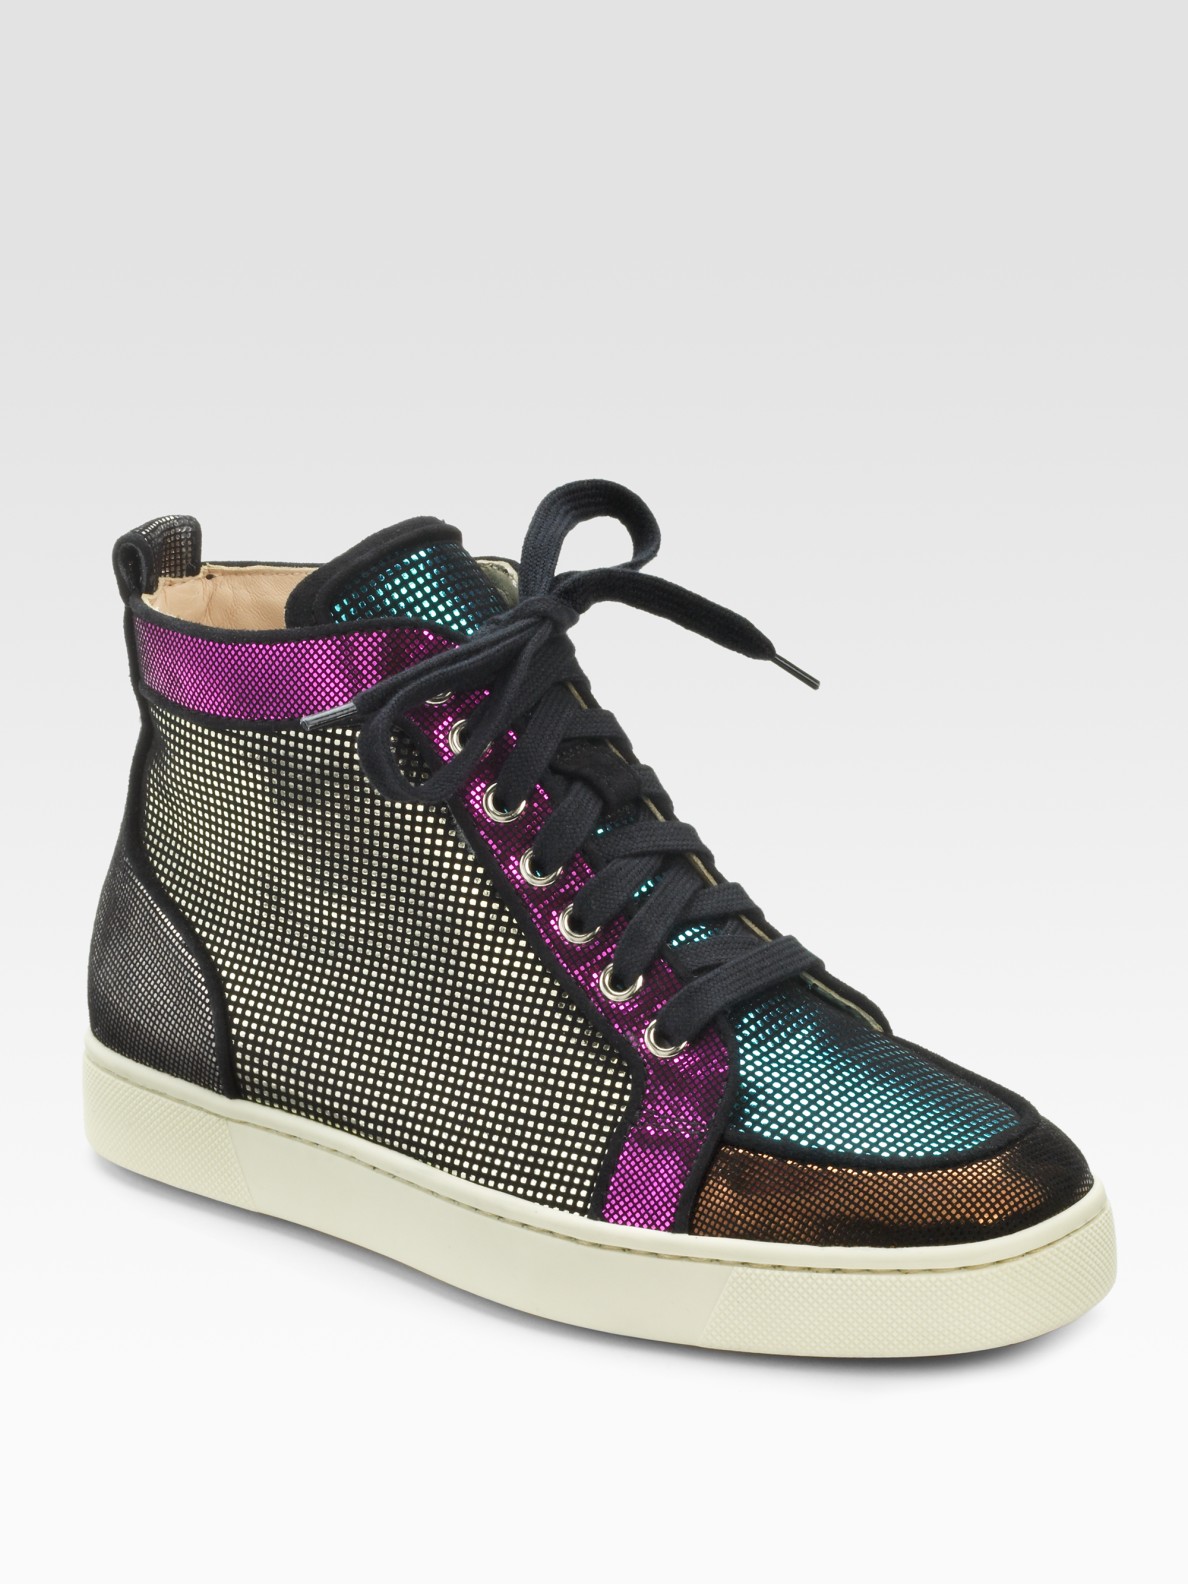 Christian Louboutin Rantus Orlatotrainer Suede and Metallic Lace-up ...